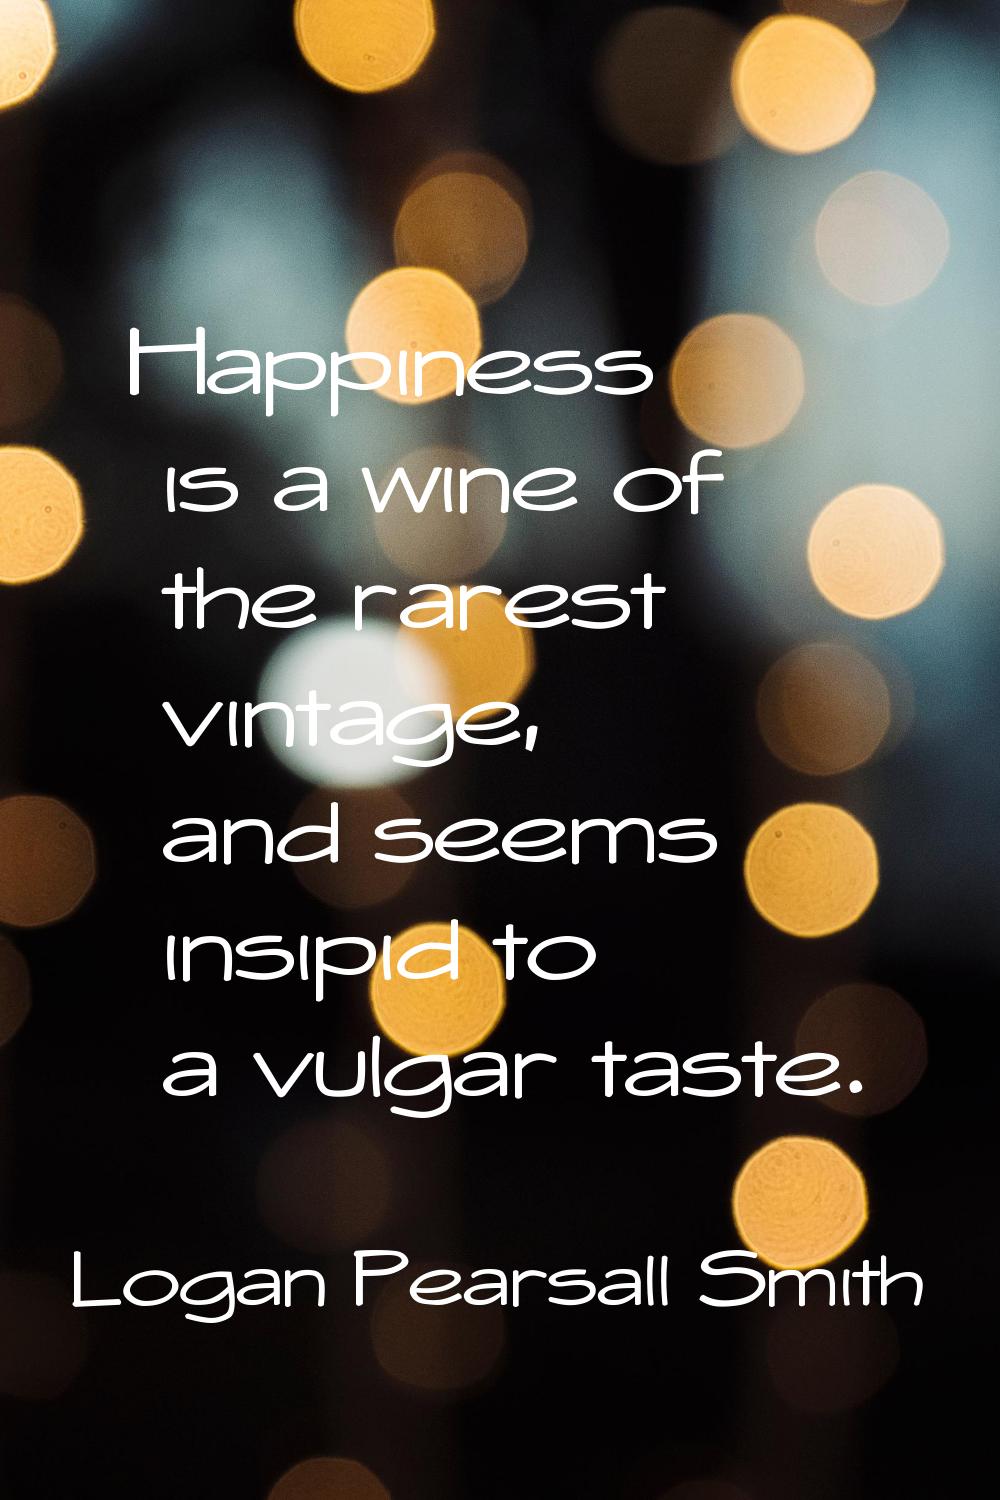 Happiness is a wine of the rarest vintage, and seems insipid to a vulgar taste.